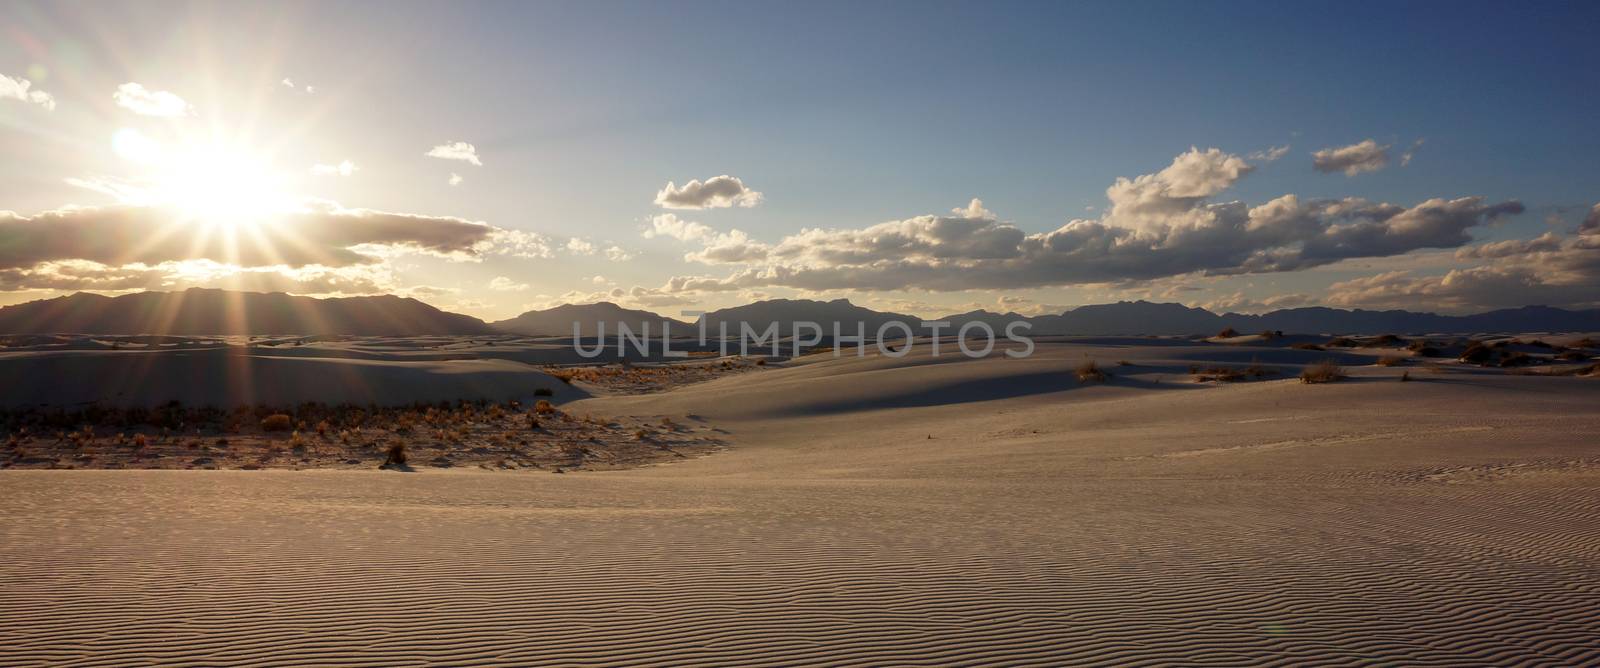 White Sands, New Mexico by tang90246